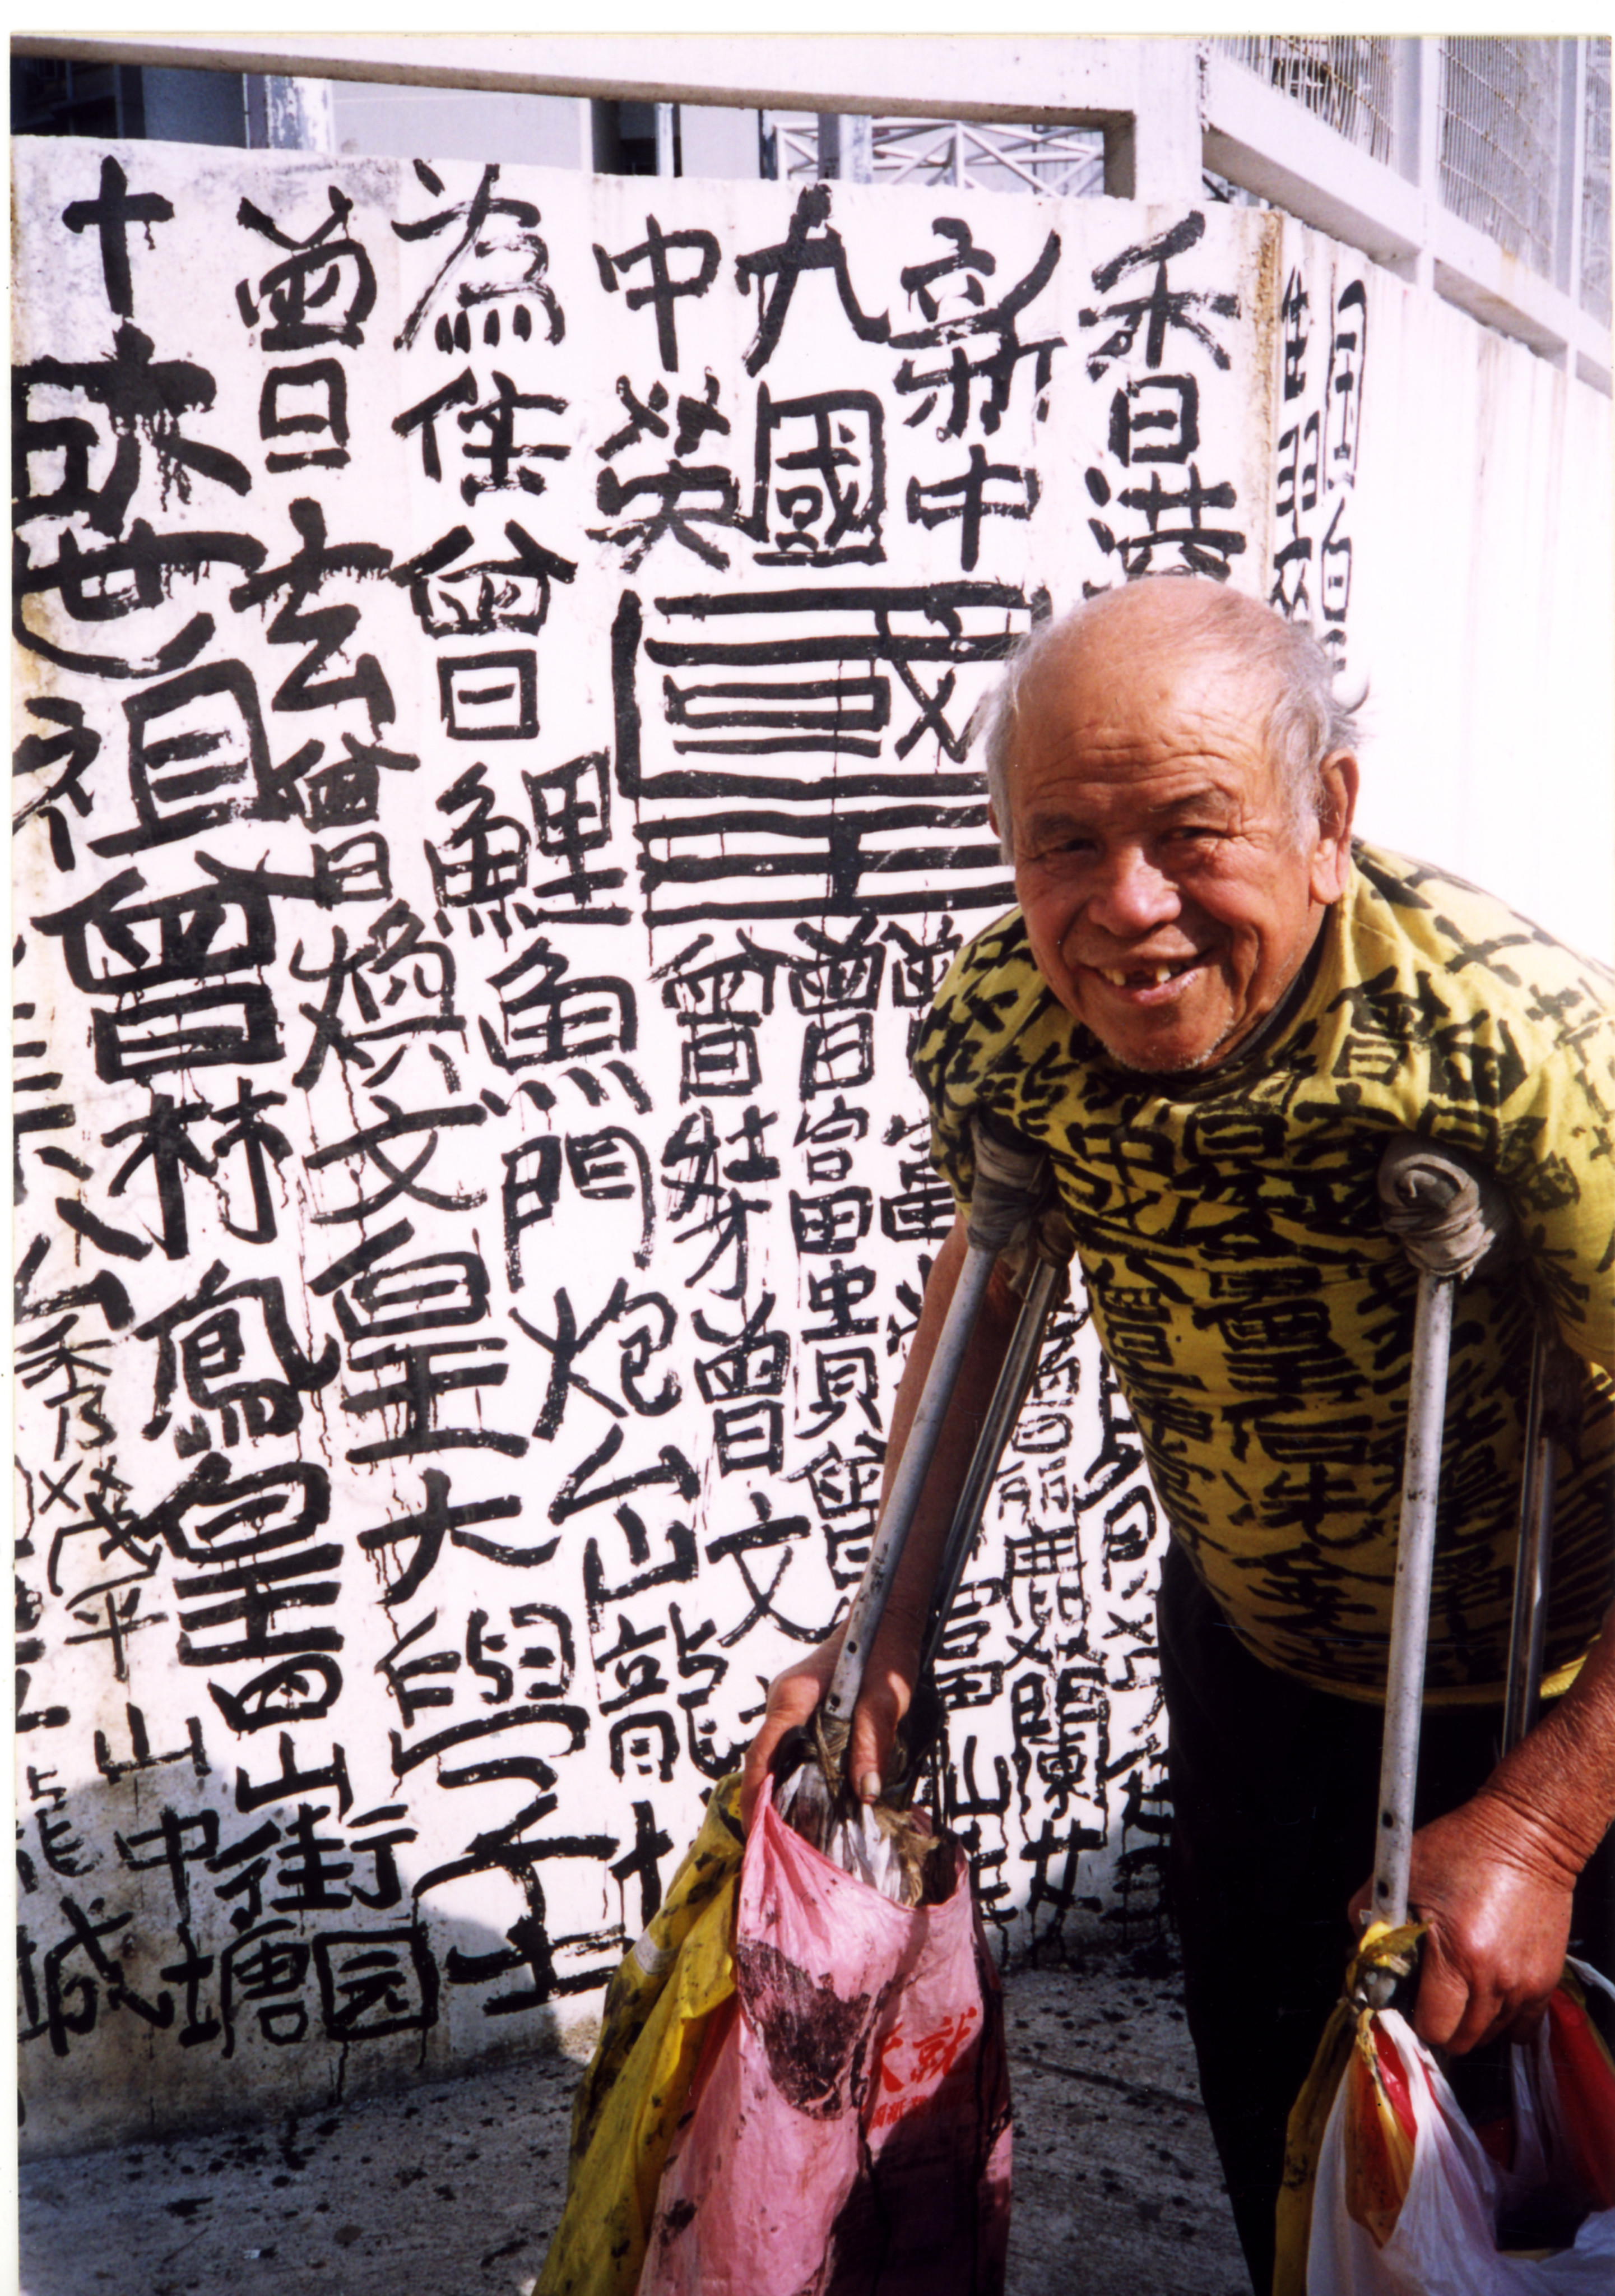 Graffiti is as old as humanity, from cave art to the bawdy humour found in Pompeii. In China, poets would put their works on walls for public viewing, while in recent years, the King of Kowloon left his graffiti all over Hong Kong.